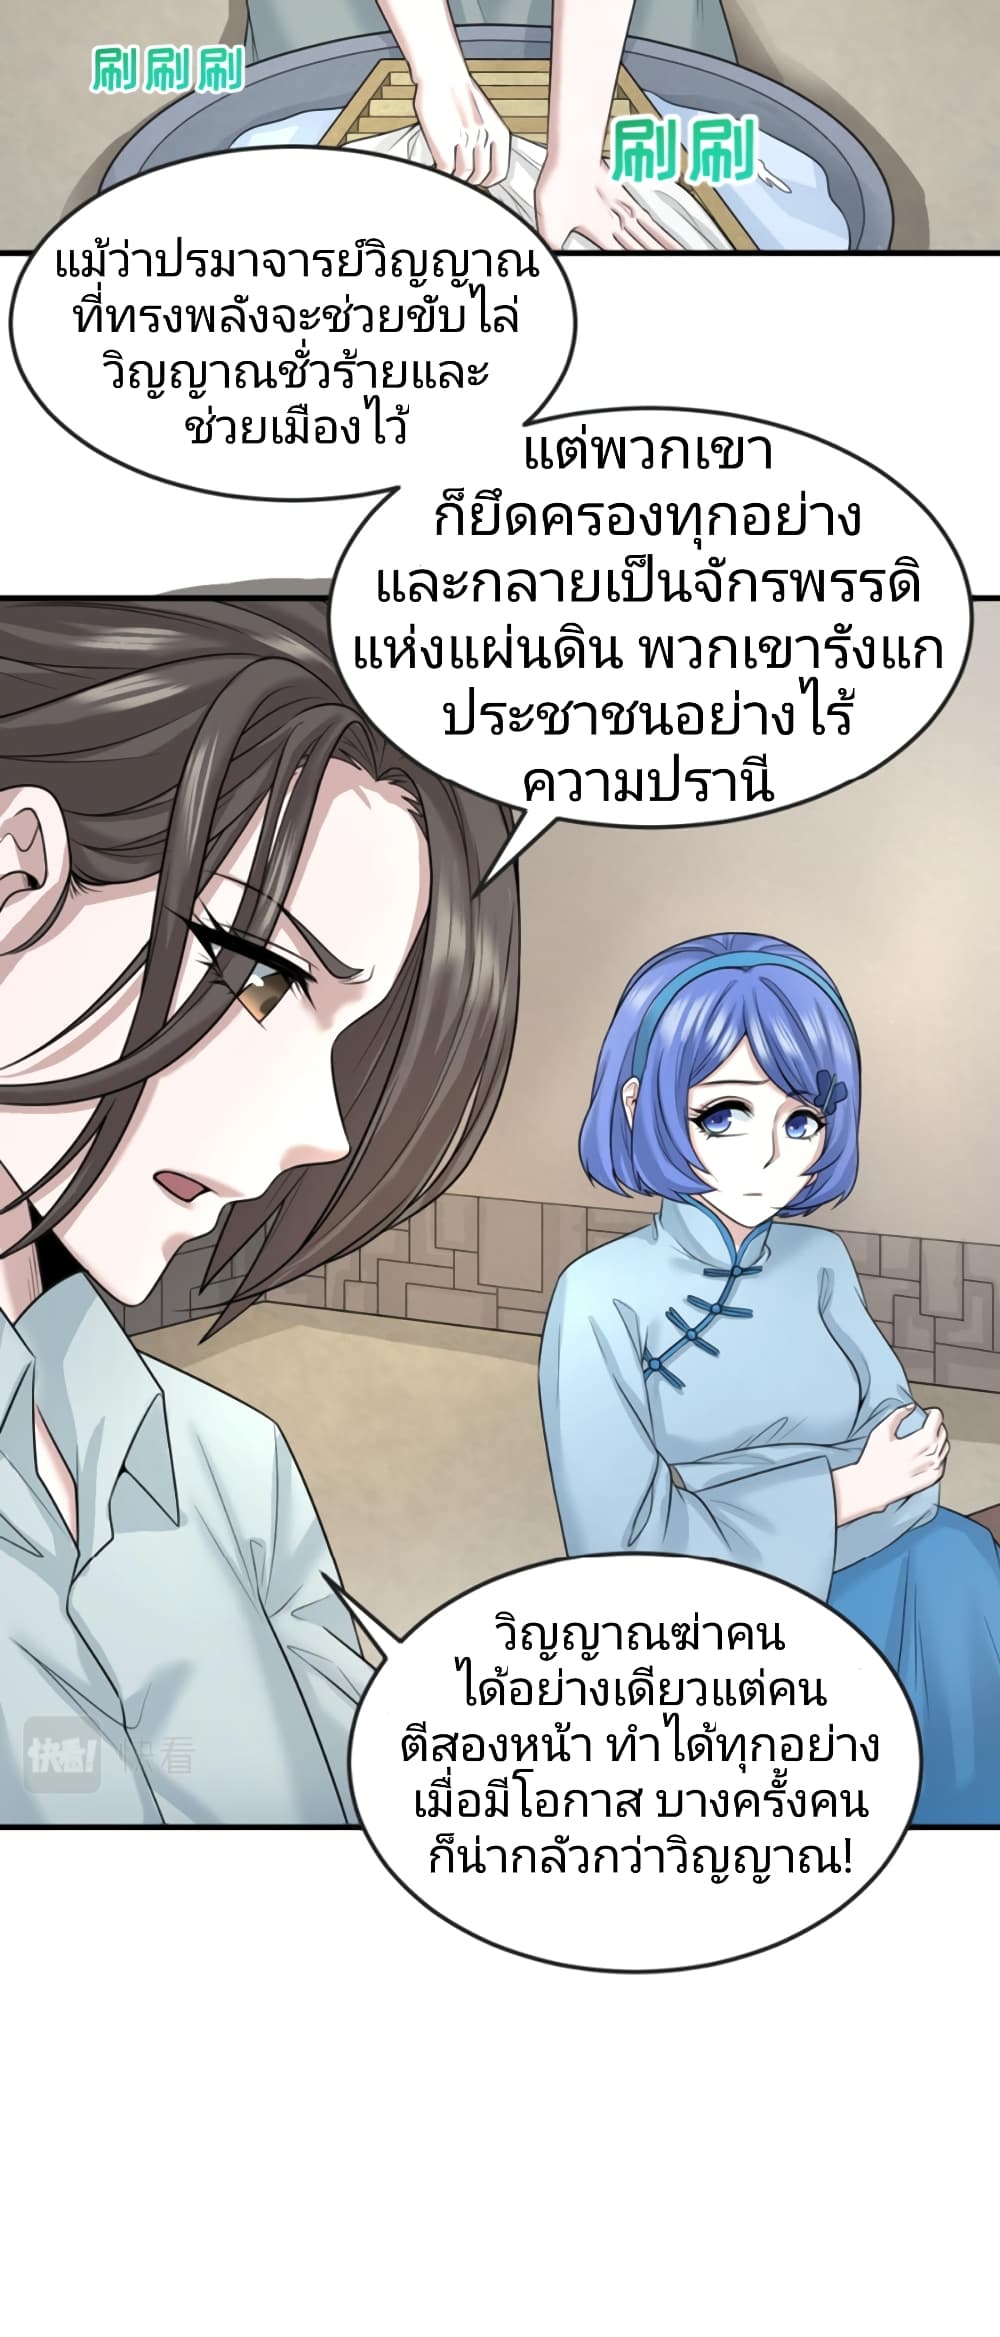 The Age of Ghost Spirits à¸à¸­à¸à¸à¸µà¹ 44 (20)